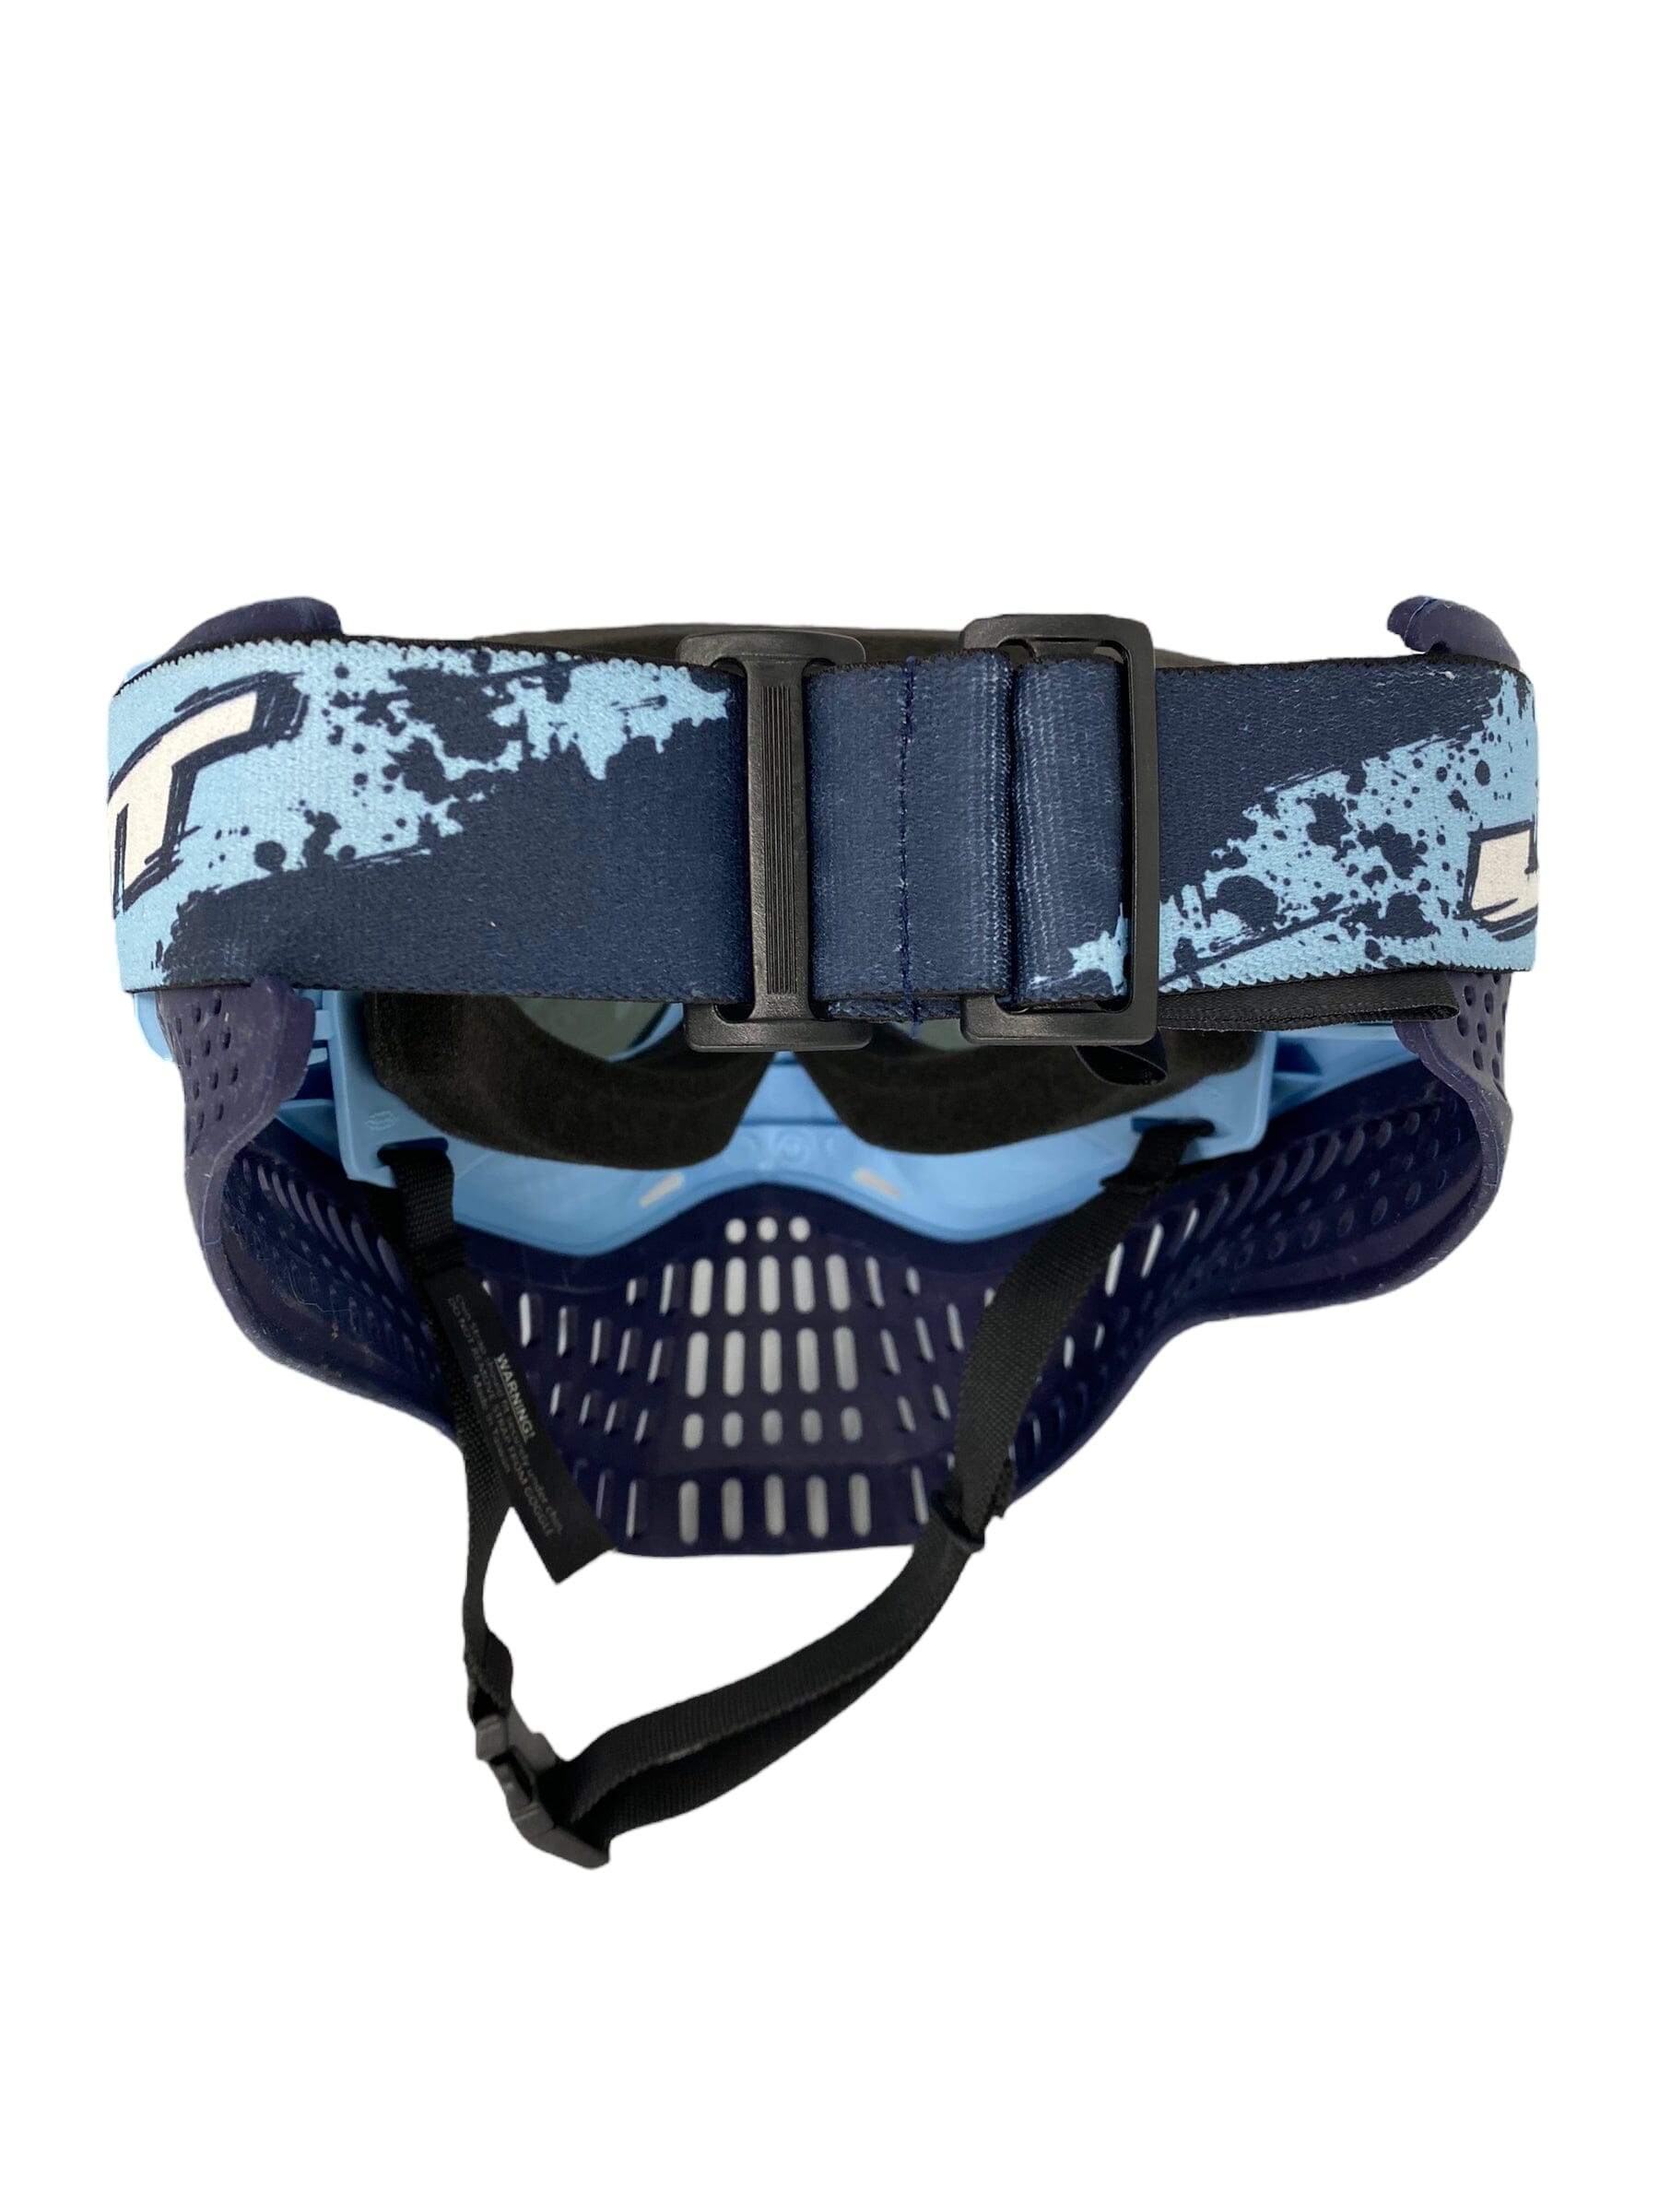 Used JT Proflex X Paintball Goggle Mask Paintball Gun from CPXBrosPaintball Buy/Sell/Trade Paintball Markers, Paintball Hoppers, Paintball Masks, and Hormesis Headbands